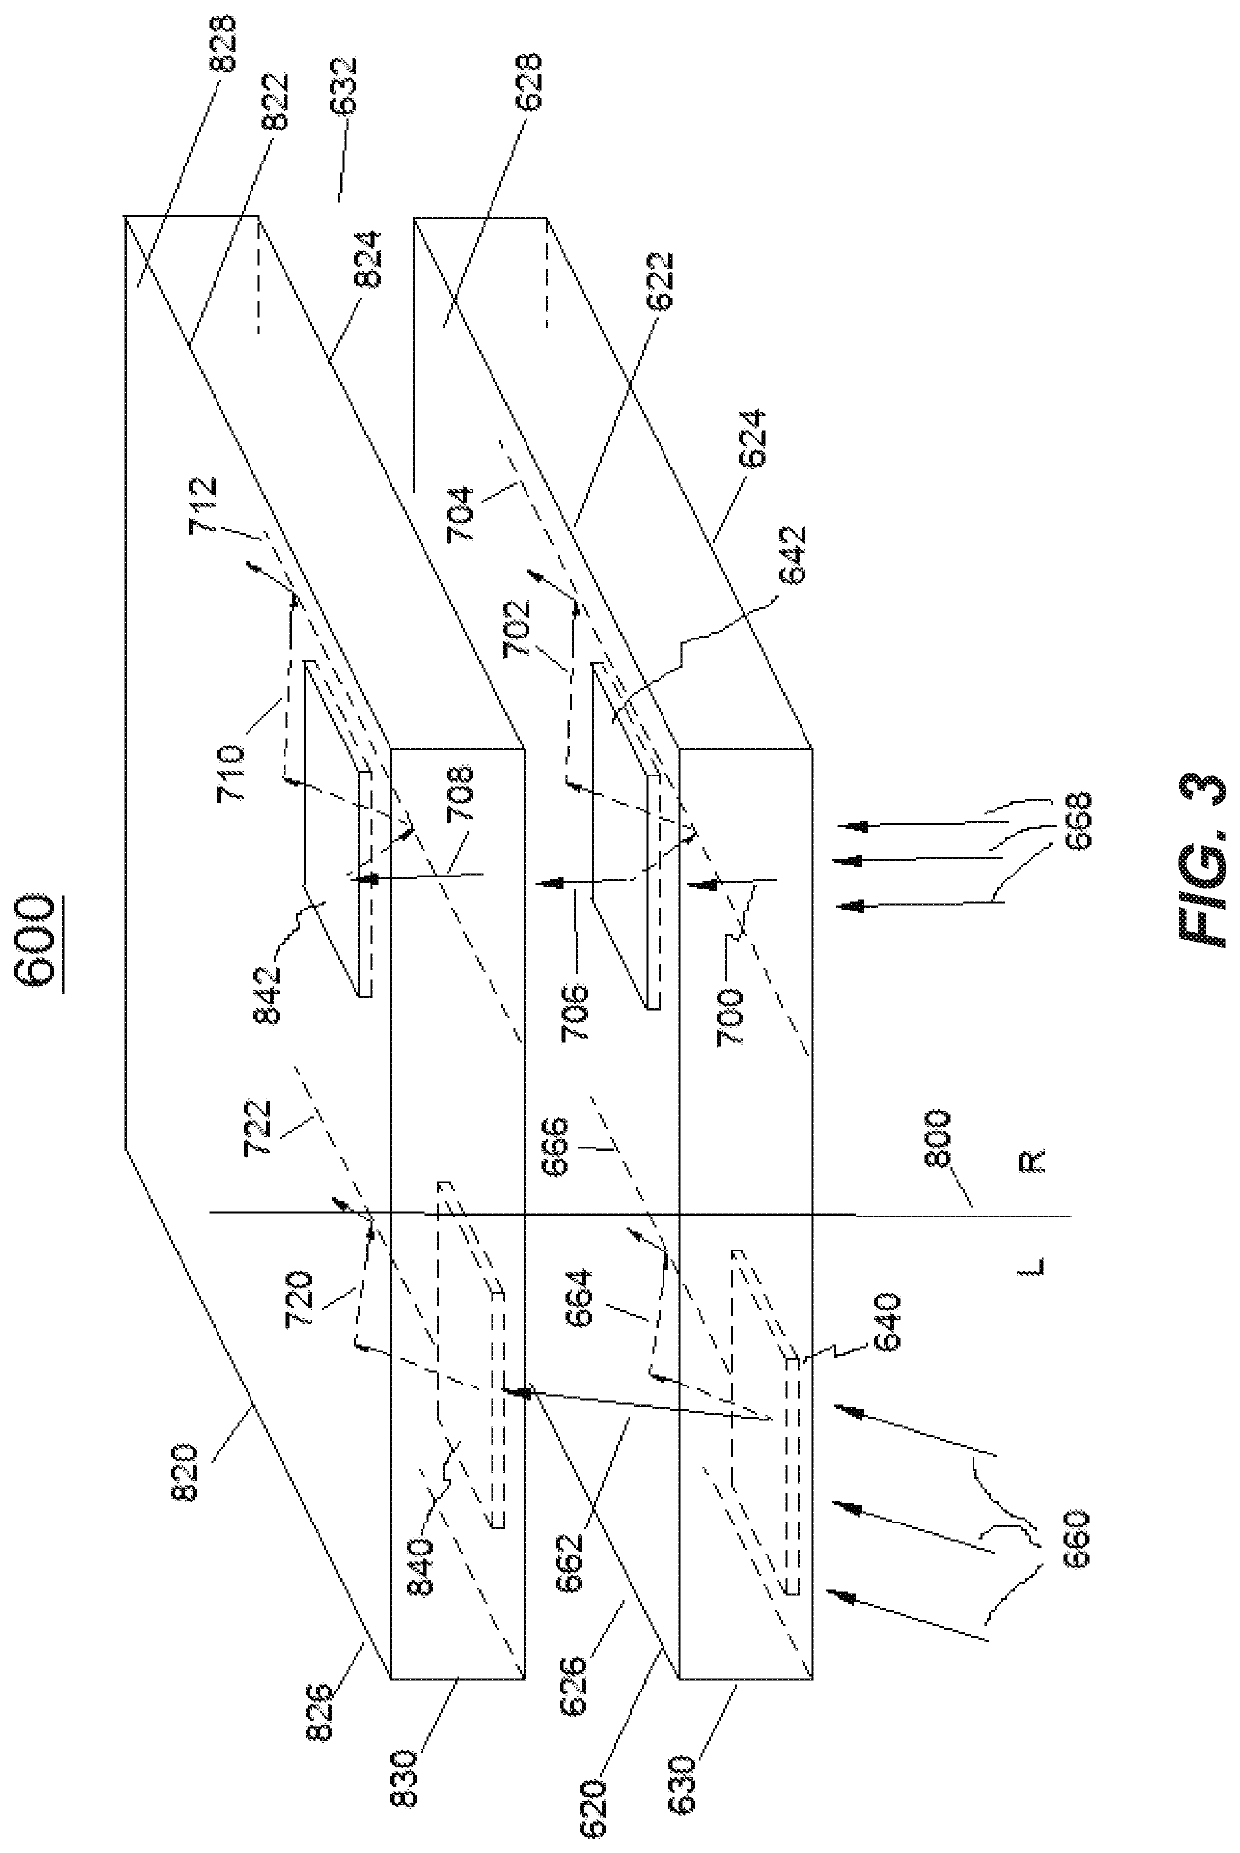 Multi-channel waveguide with reduced crosstalk